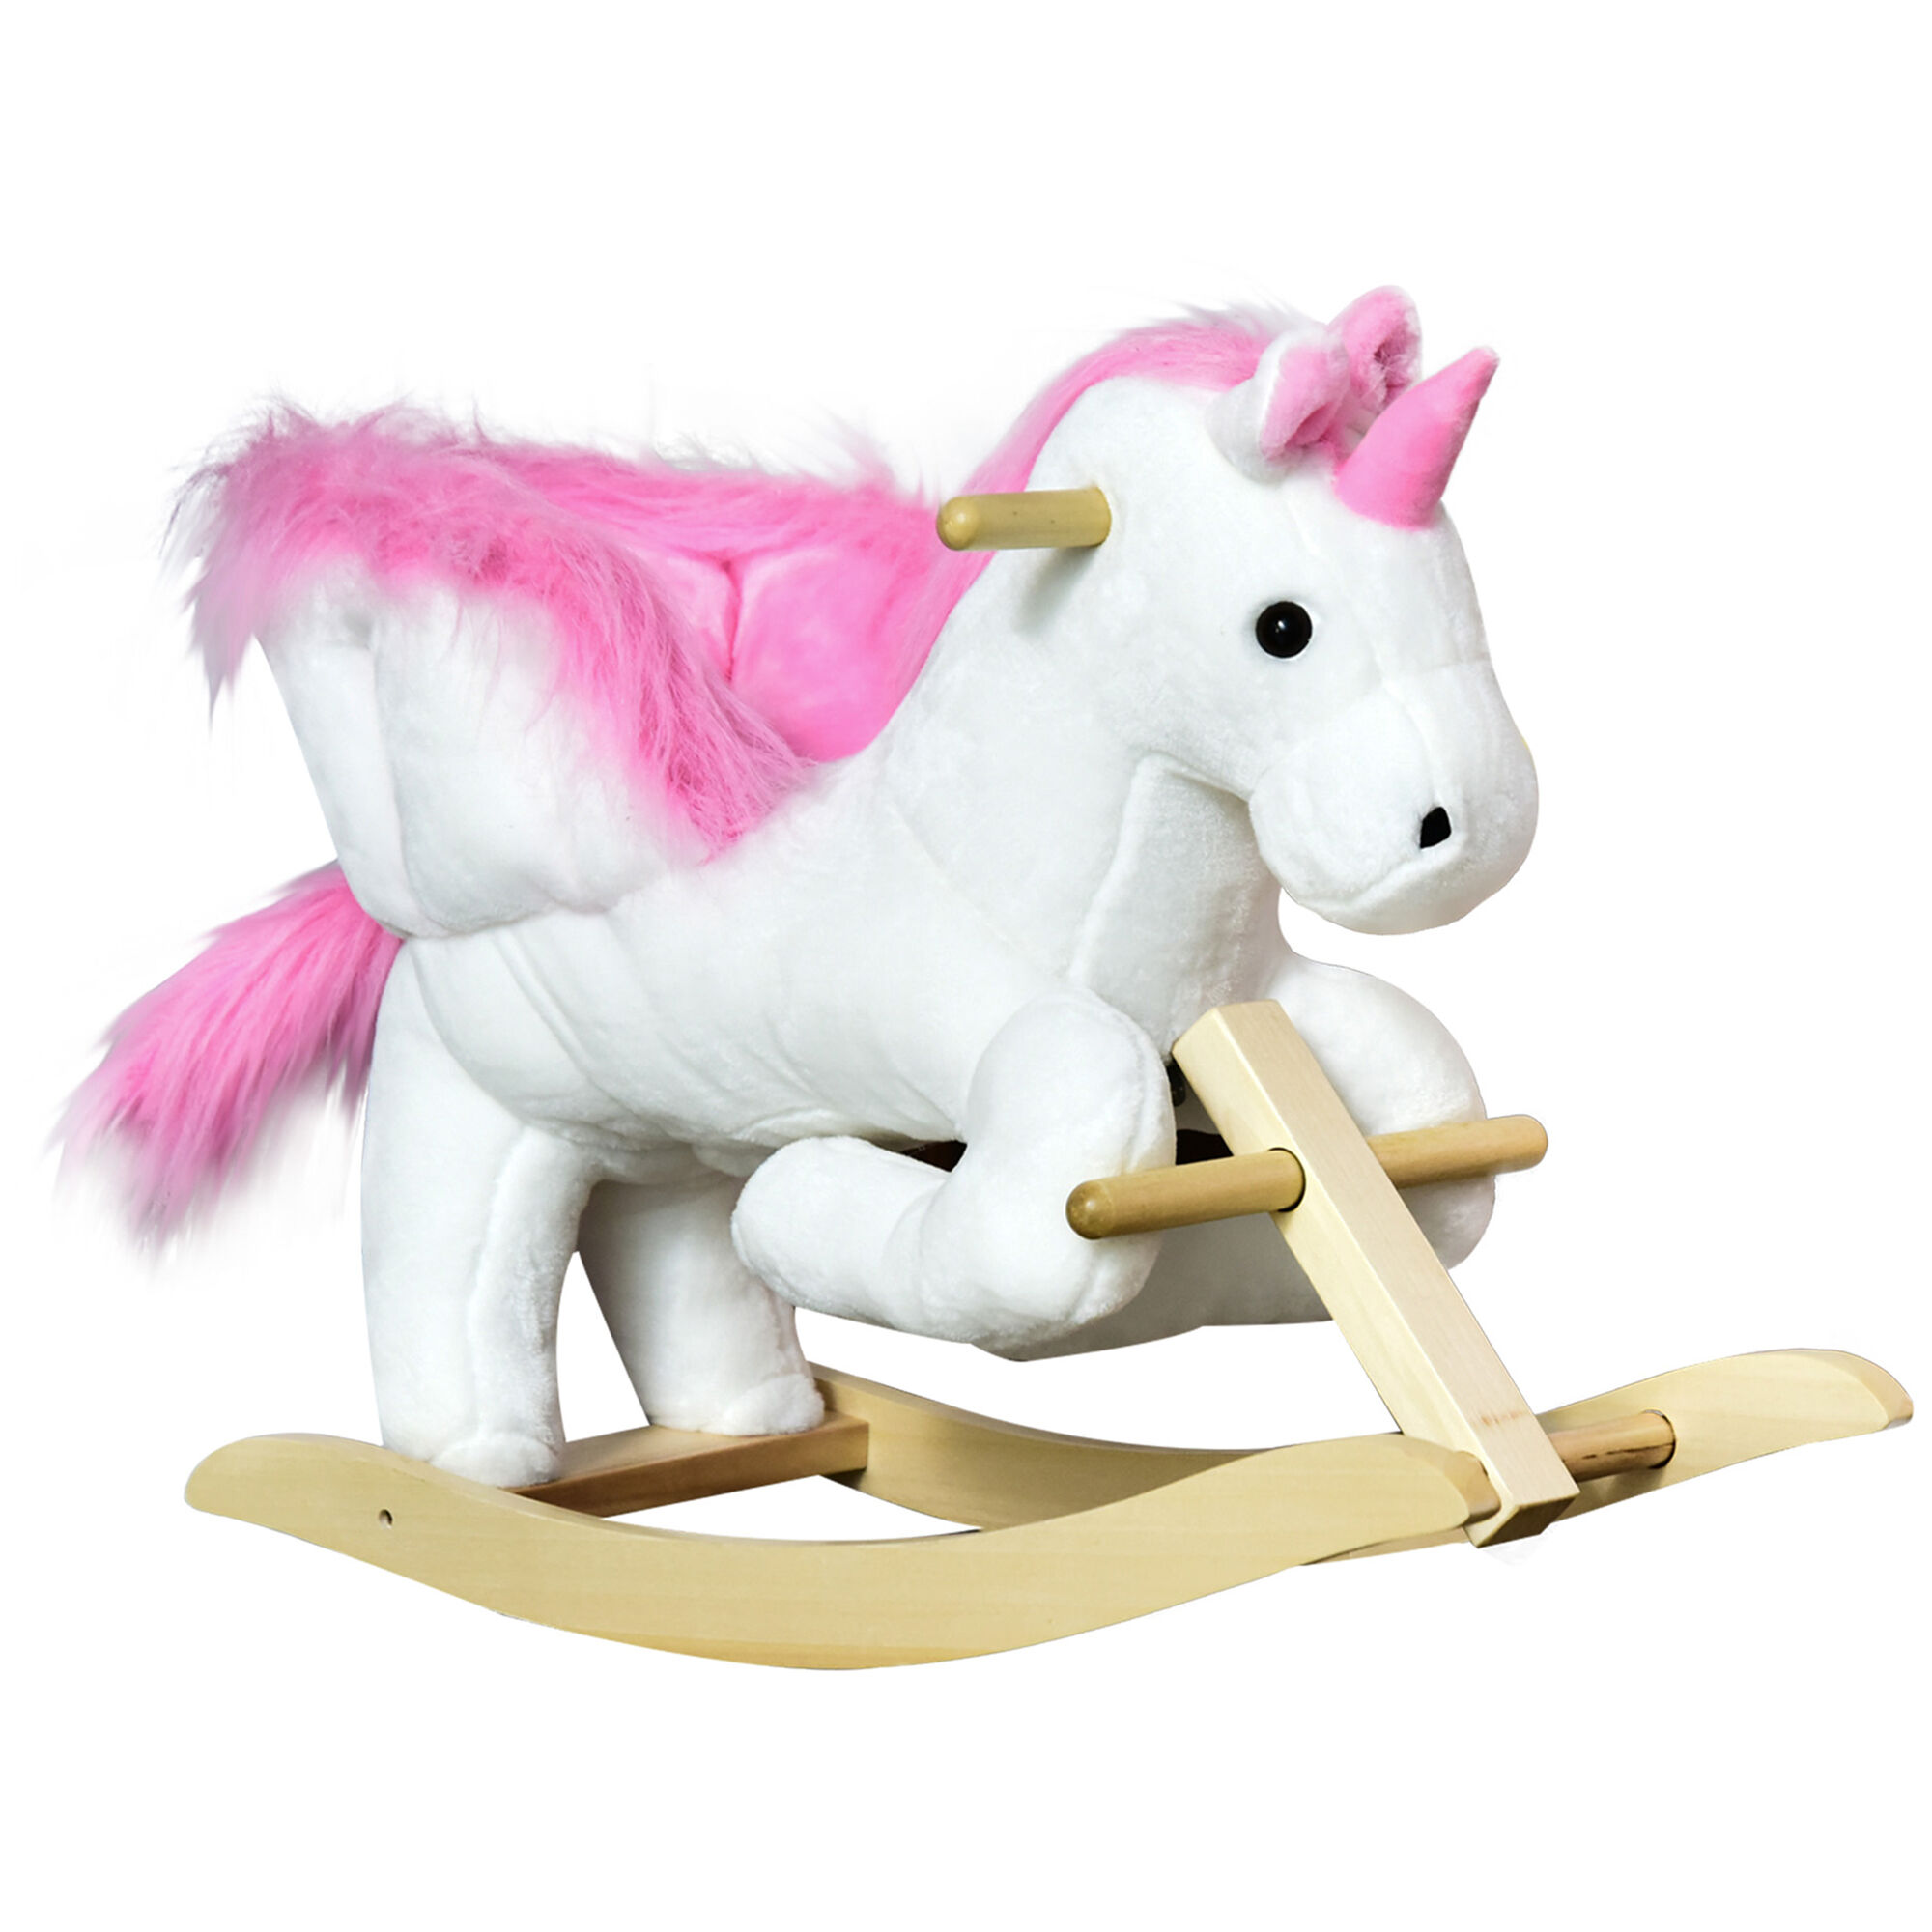 Qaba Baby Plush Rocking Unicorn Wooden Ride-On Chair Lullaby Song 18-36 Months White Pink Comfort Joy Aosom.com